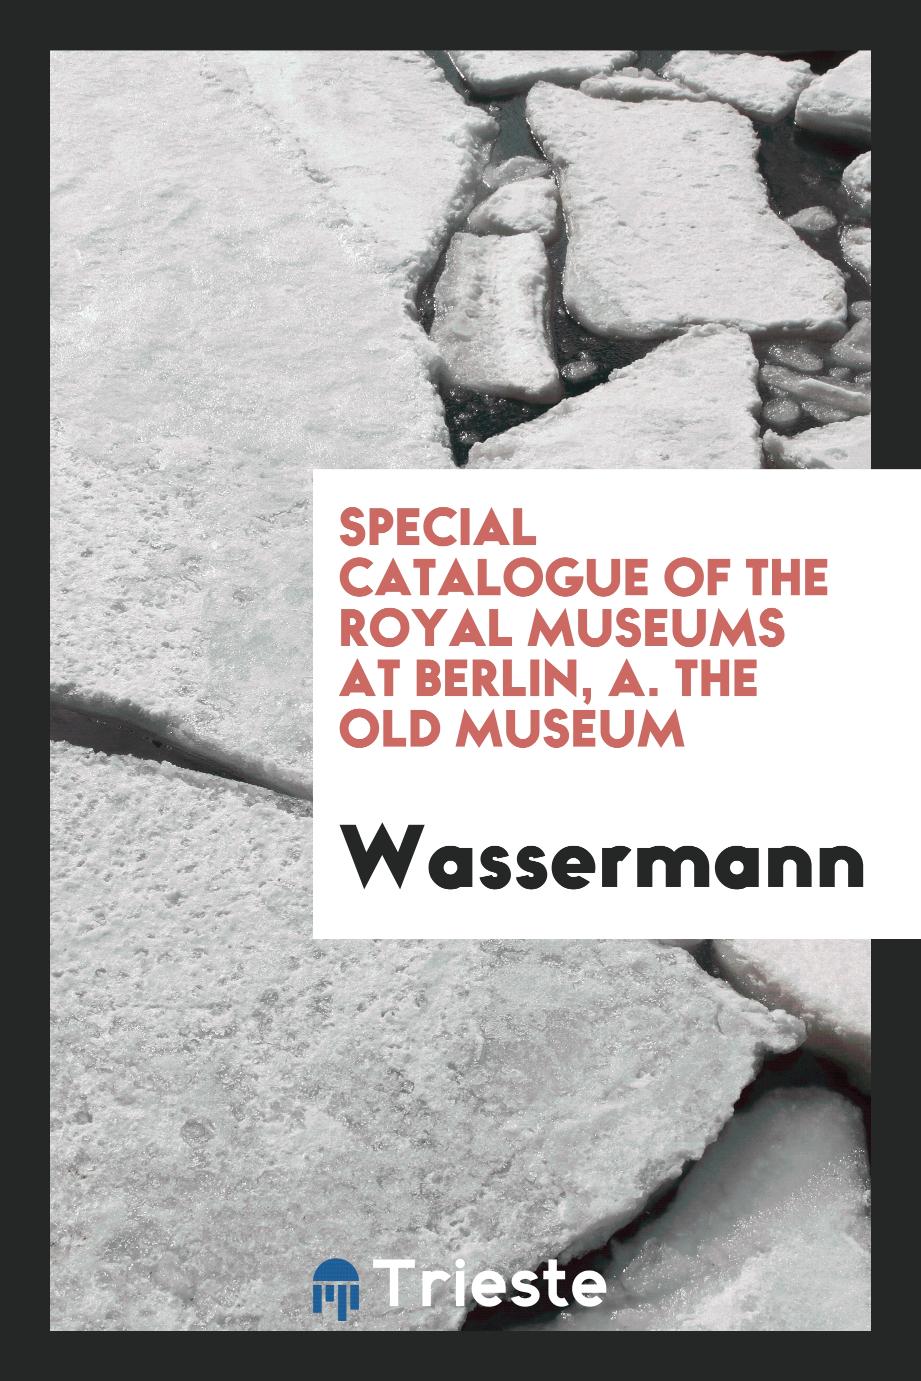 Special Catalogue of the Royal Museums at Berlin, A. The Old Museum